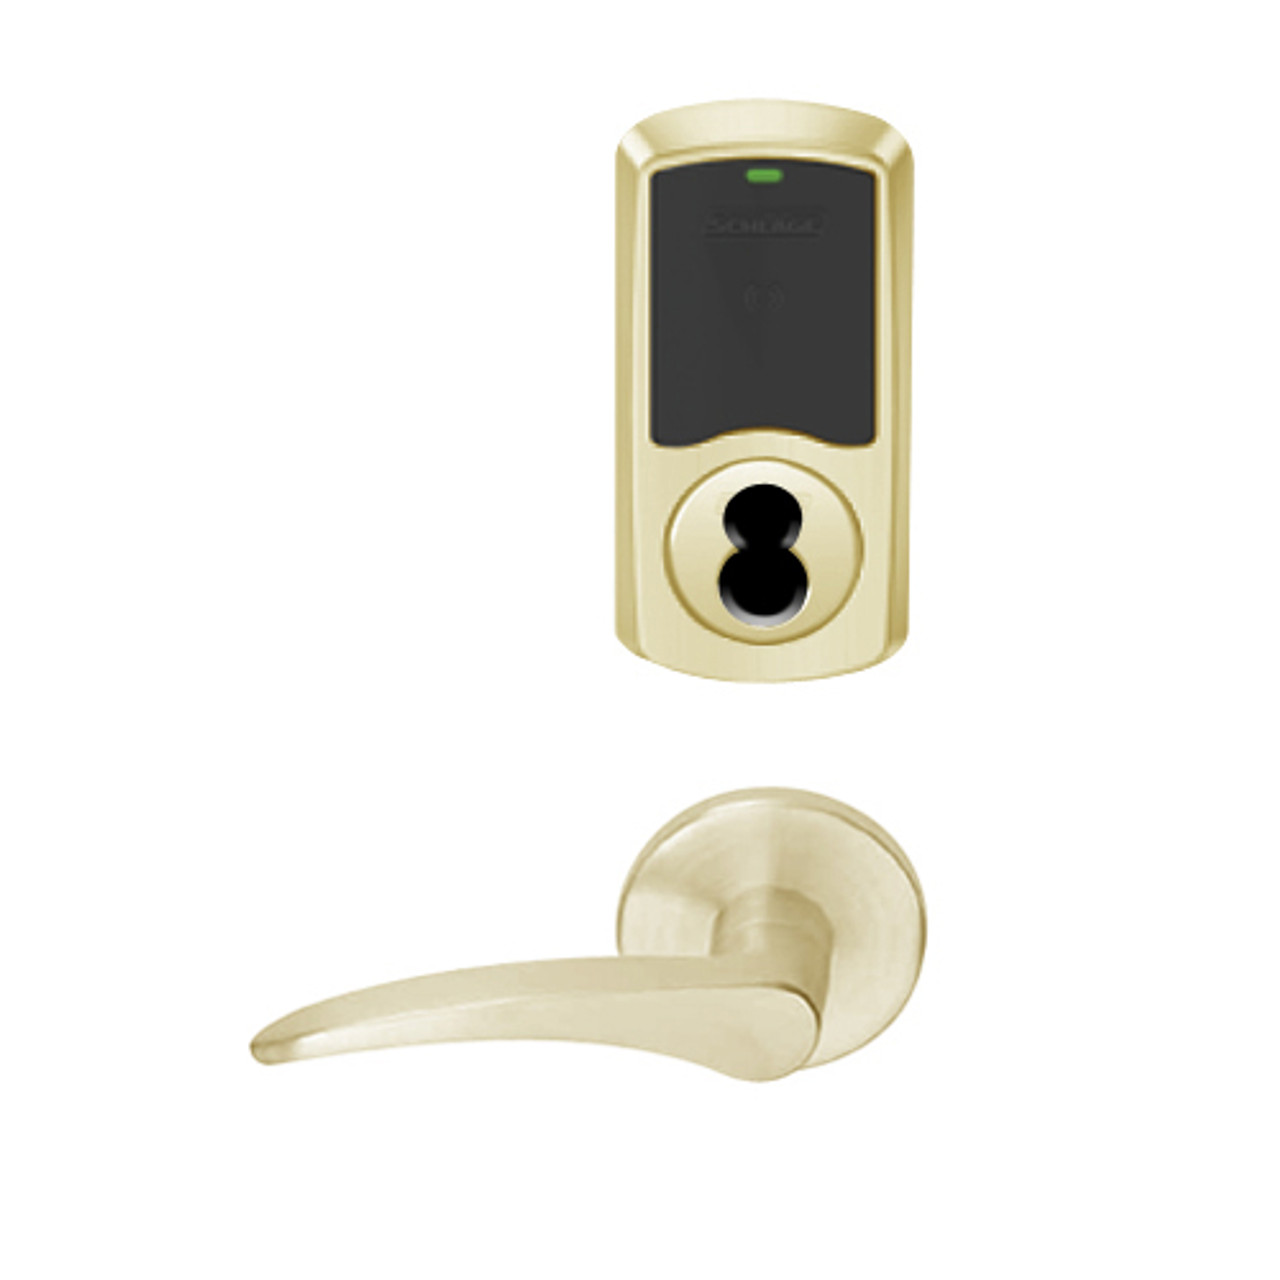 LEMS-GRW-BD-12-606-00A-LH Schlage Storeroom Wireless Greenwich Mortise Lock with LED Indicator and 12 Lever Prepped for SFIC in Satin Brass